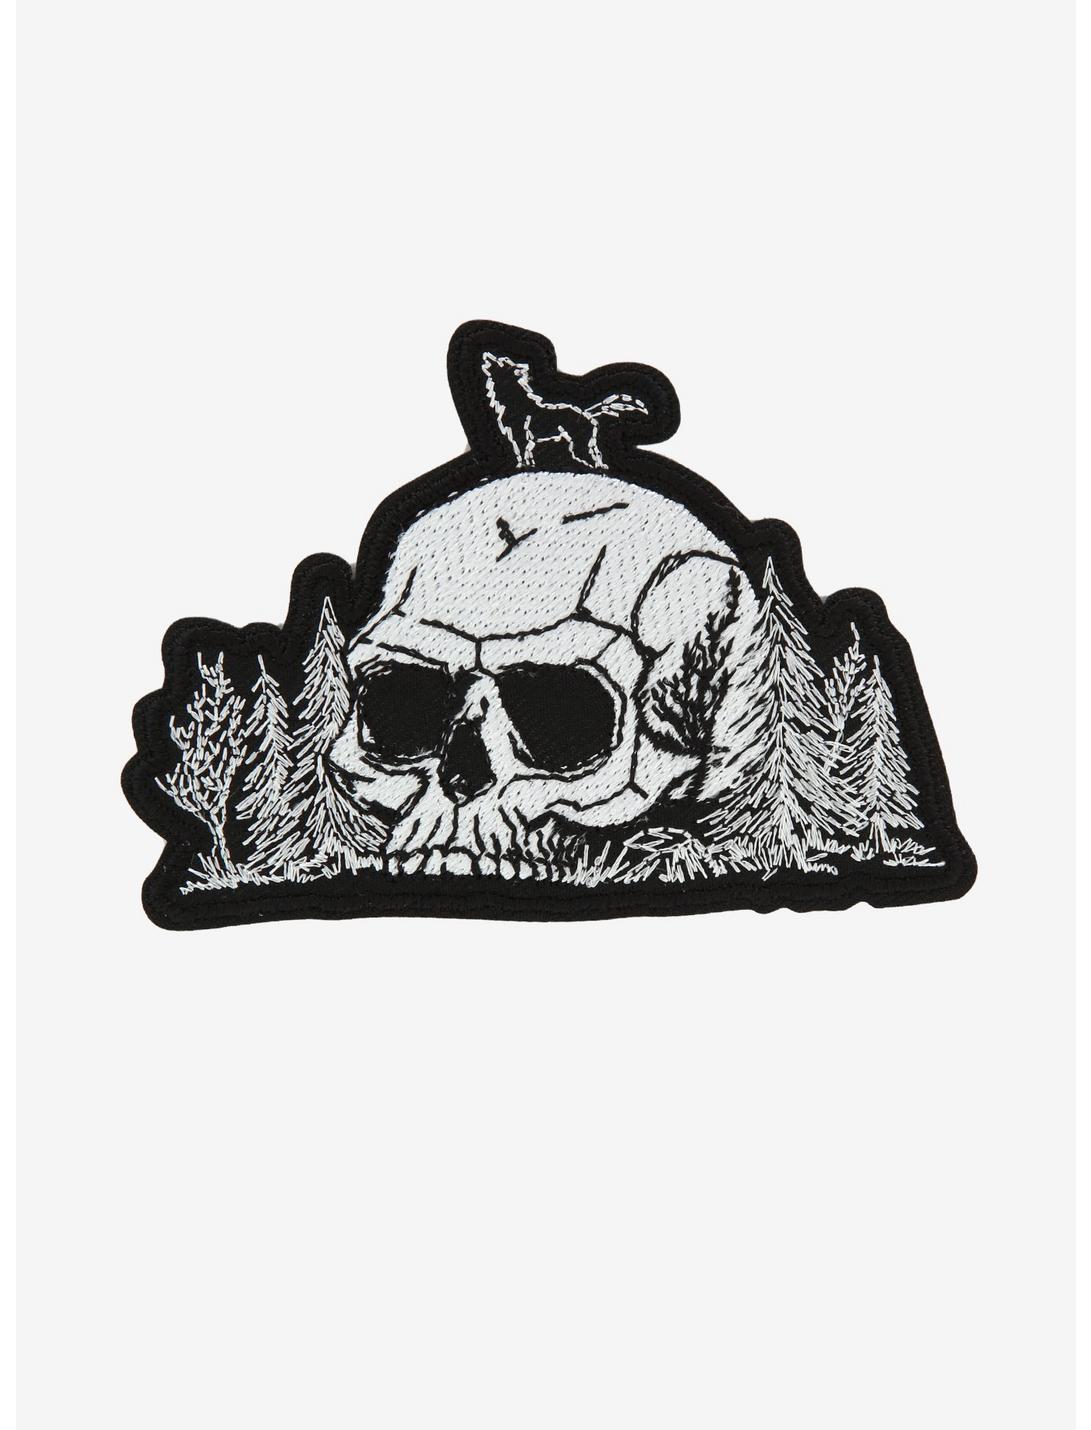 Skull Forest Patch By Tobe Fonseca, , hi-res